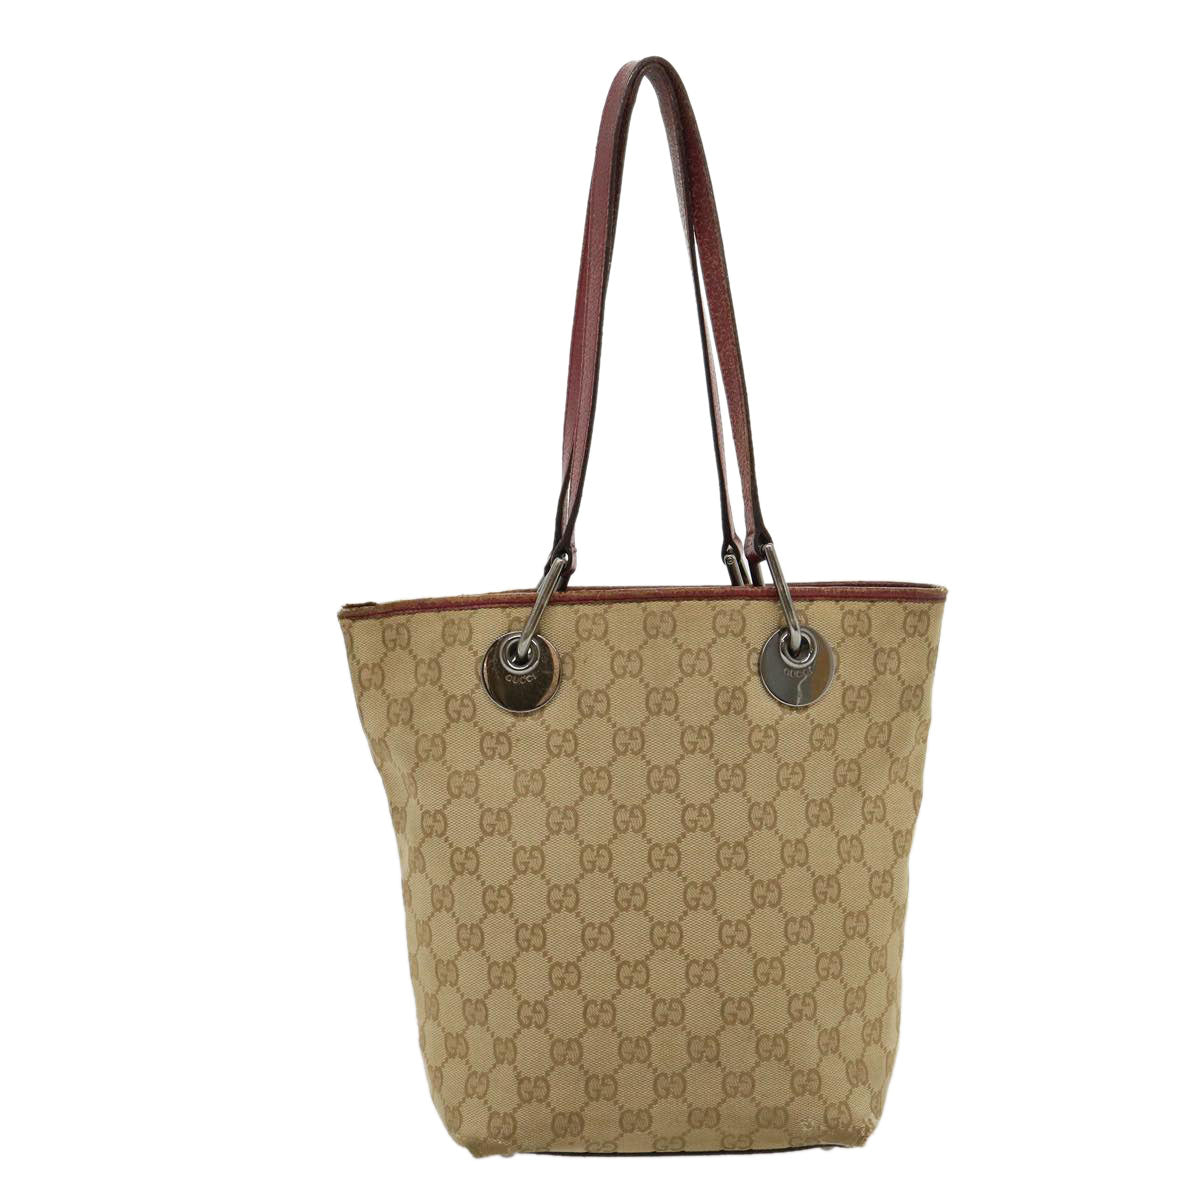 GUCCI GG Canvas Tote Bag Beige Auth uy028